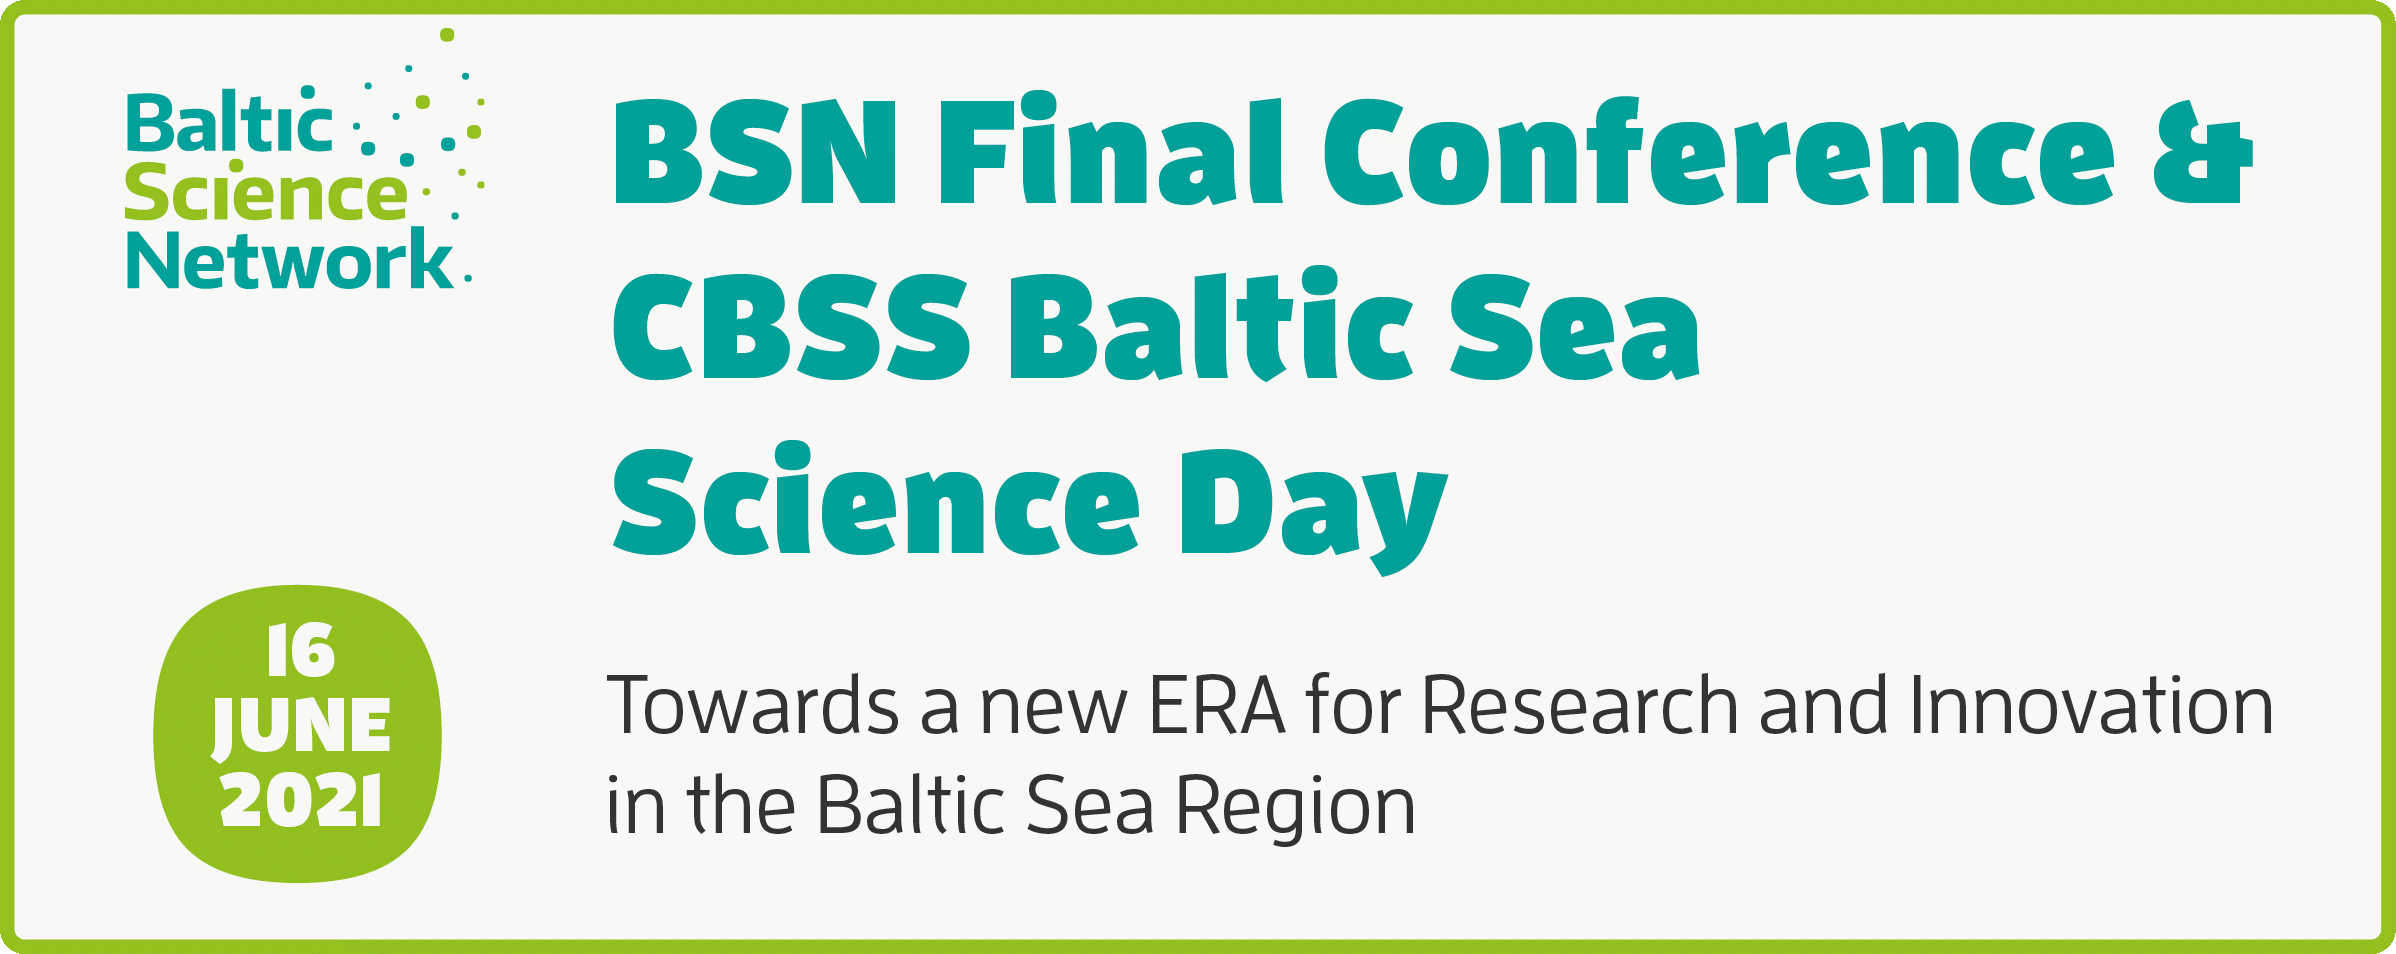 Towards a new ERA for Research and Innovation in the Baltic Sea Region